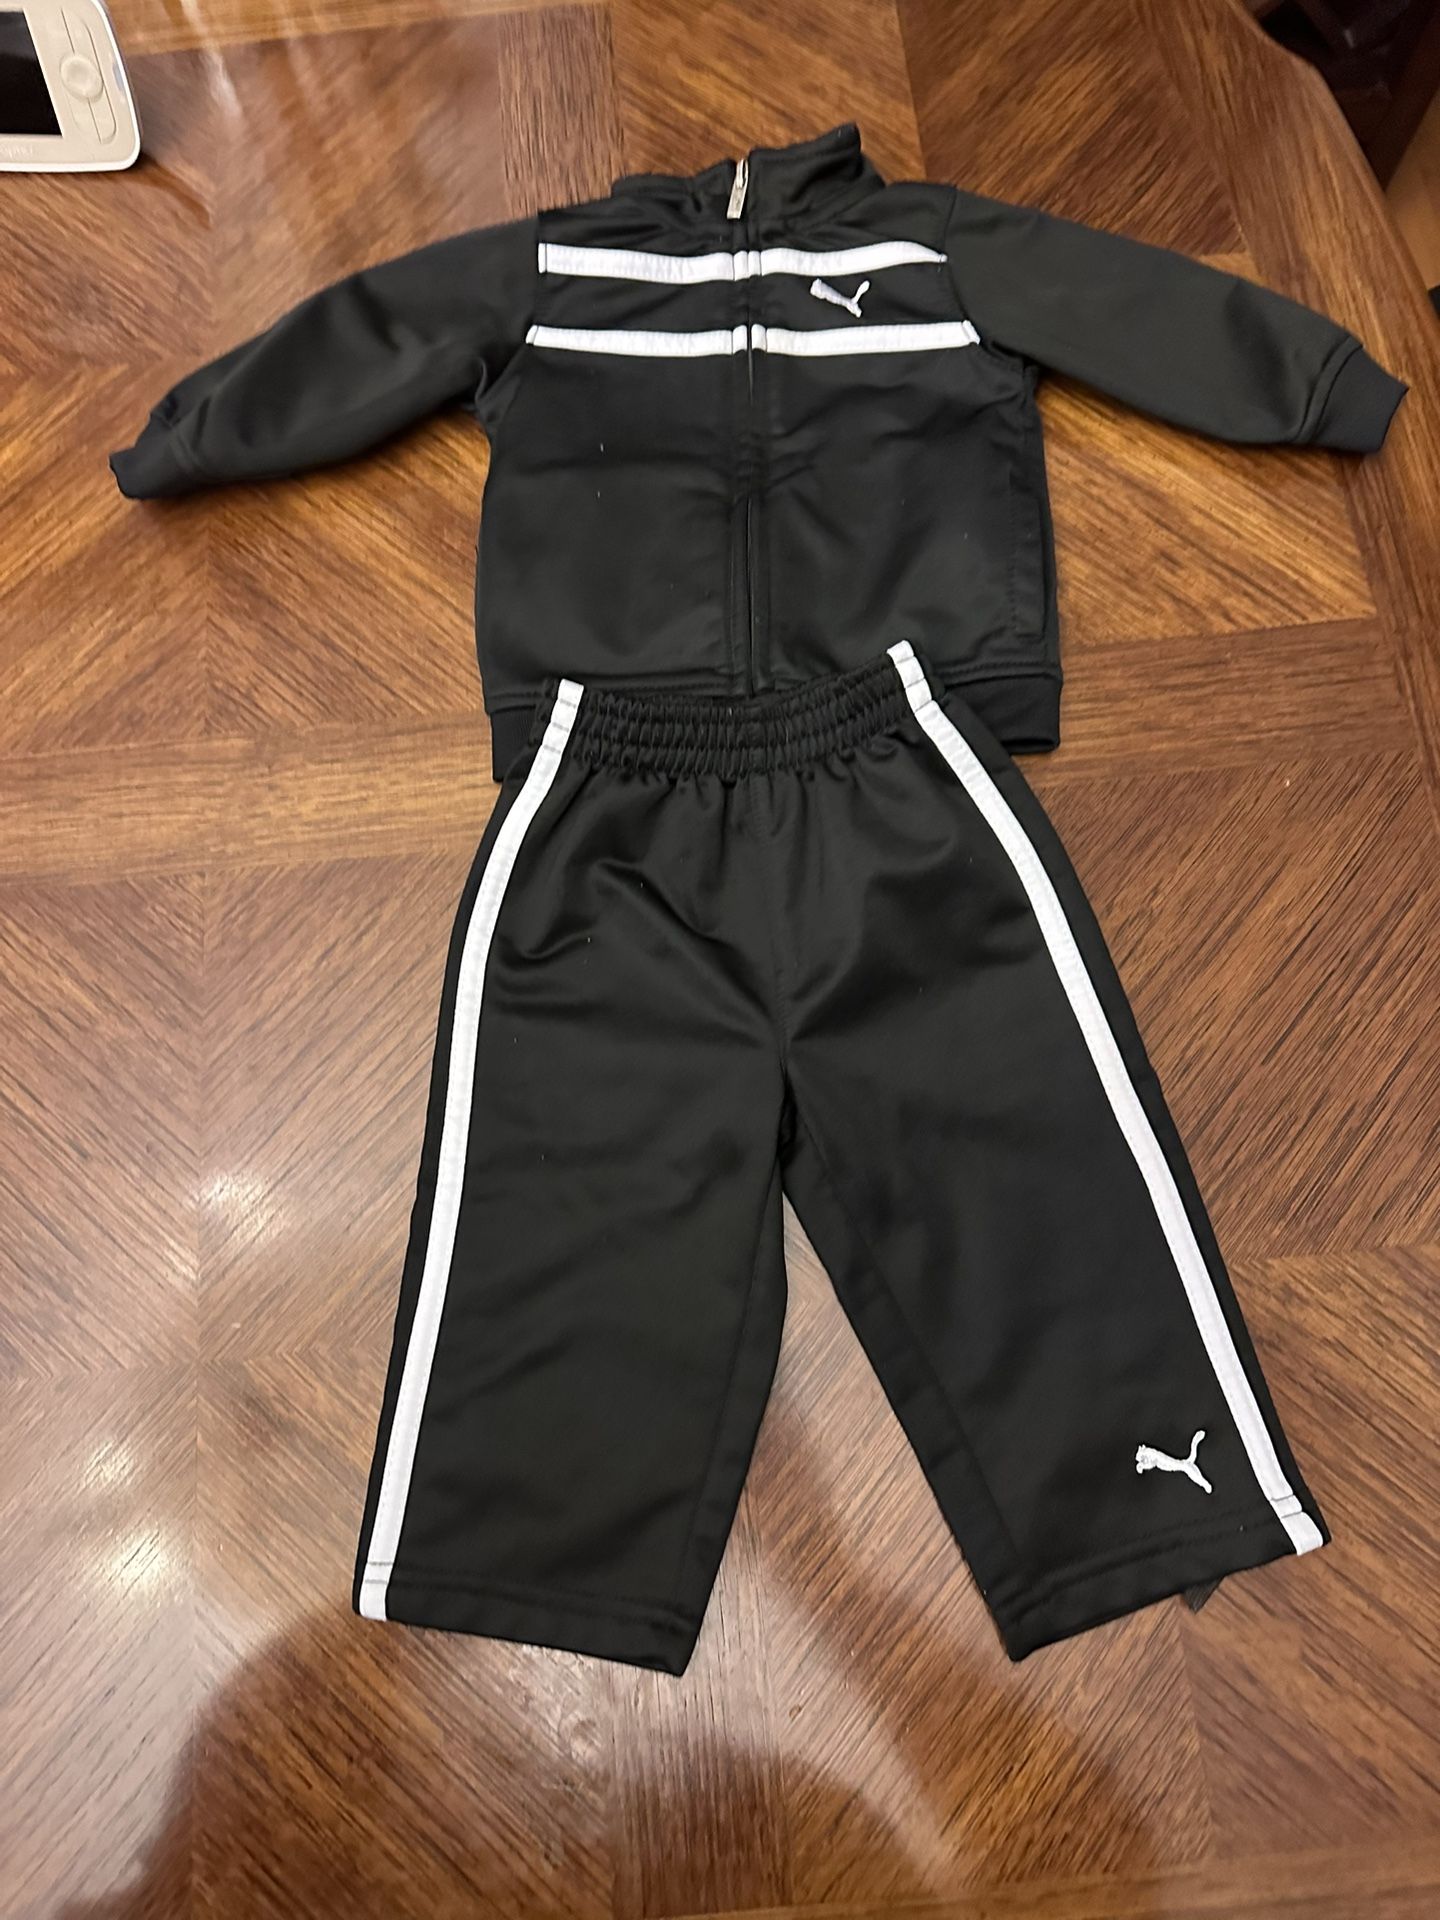 puma baby outfit